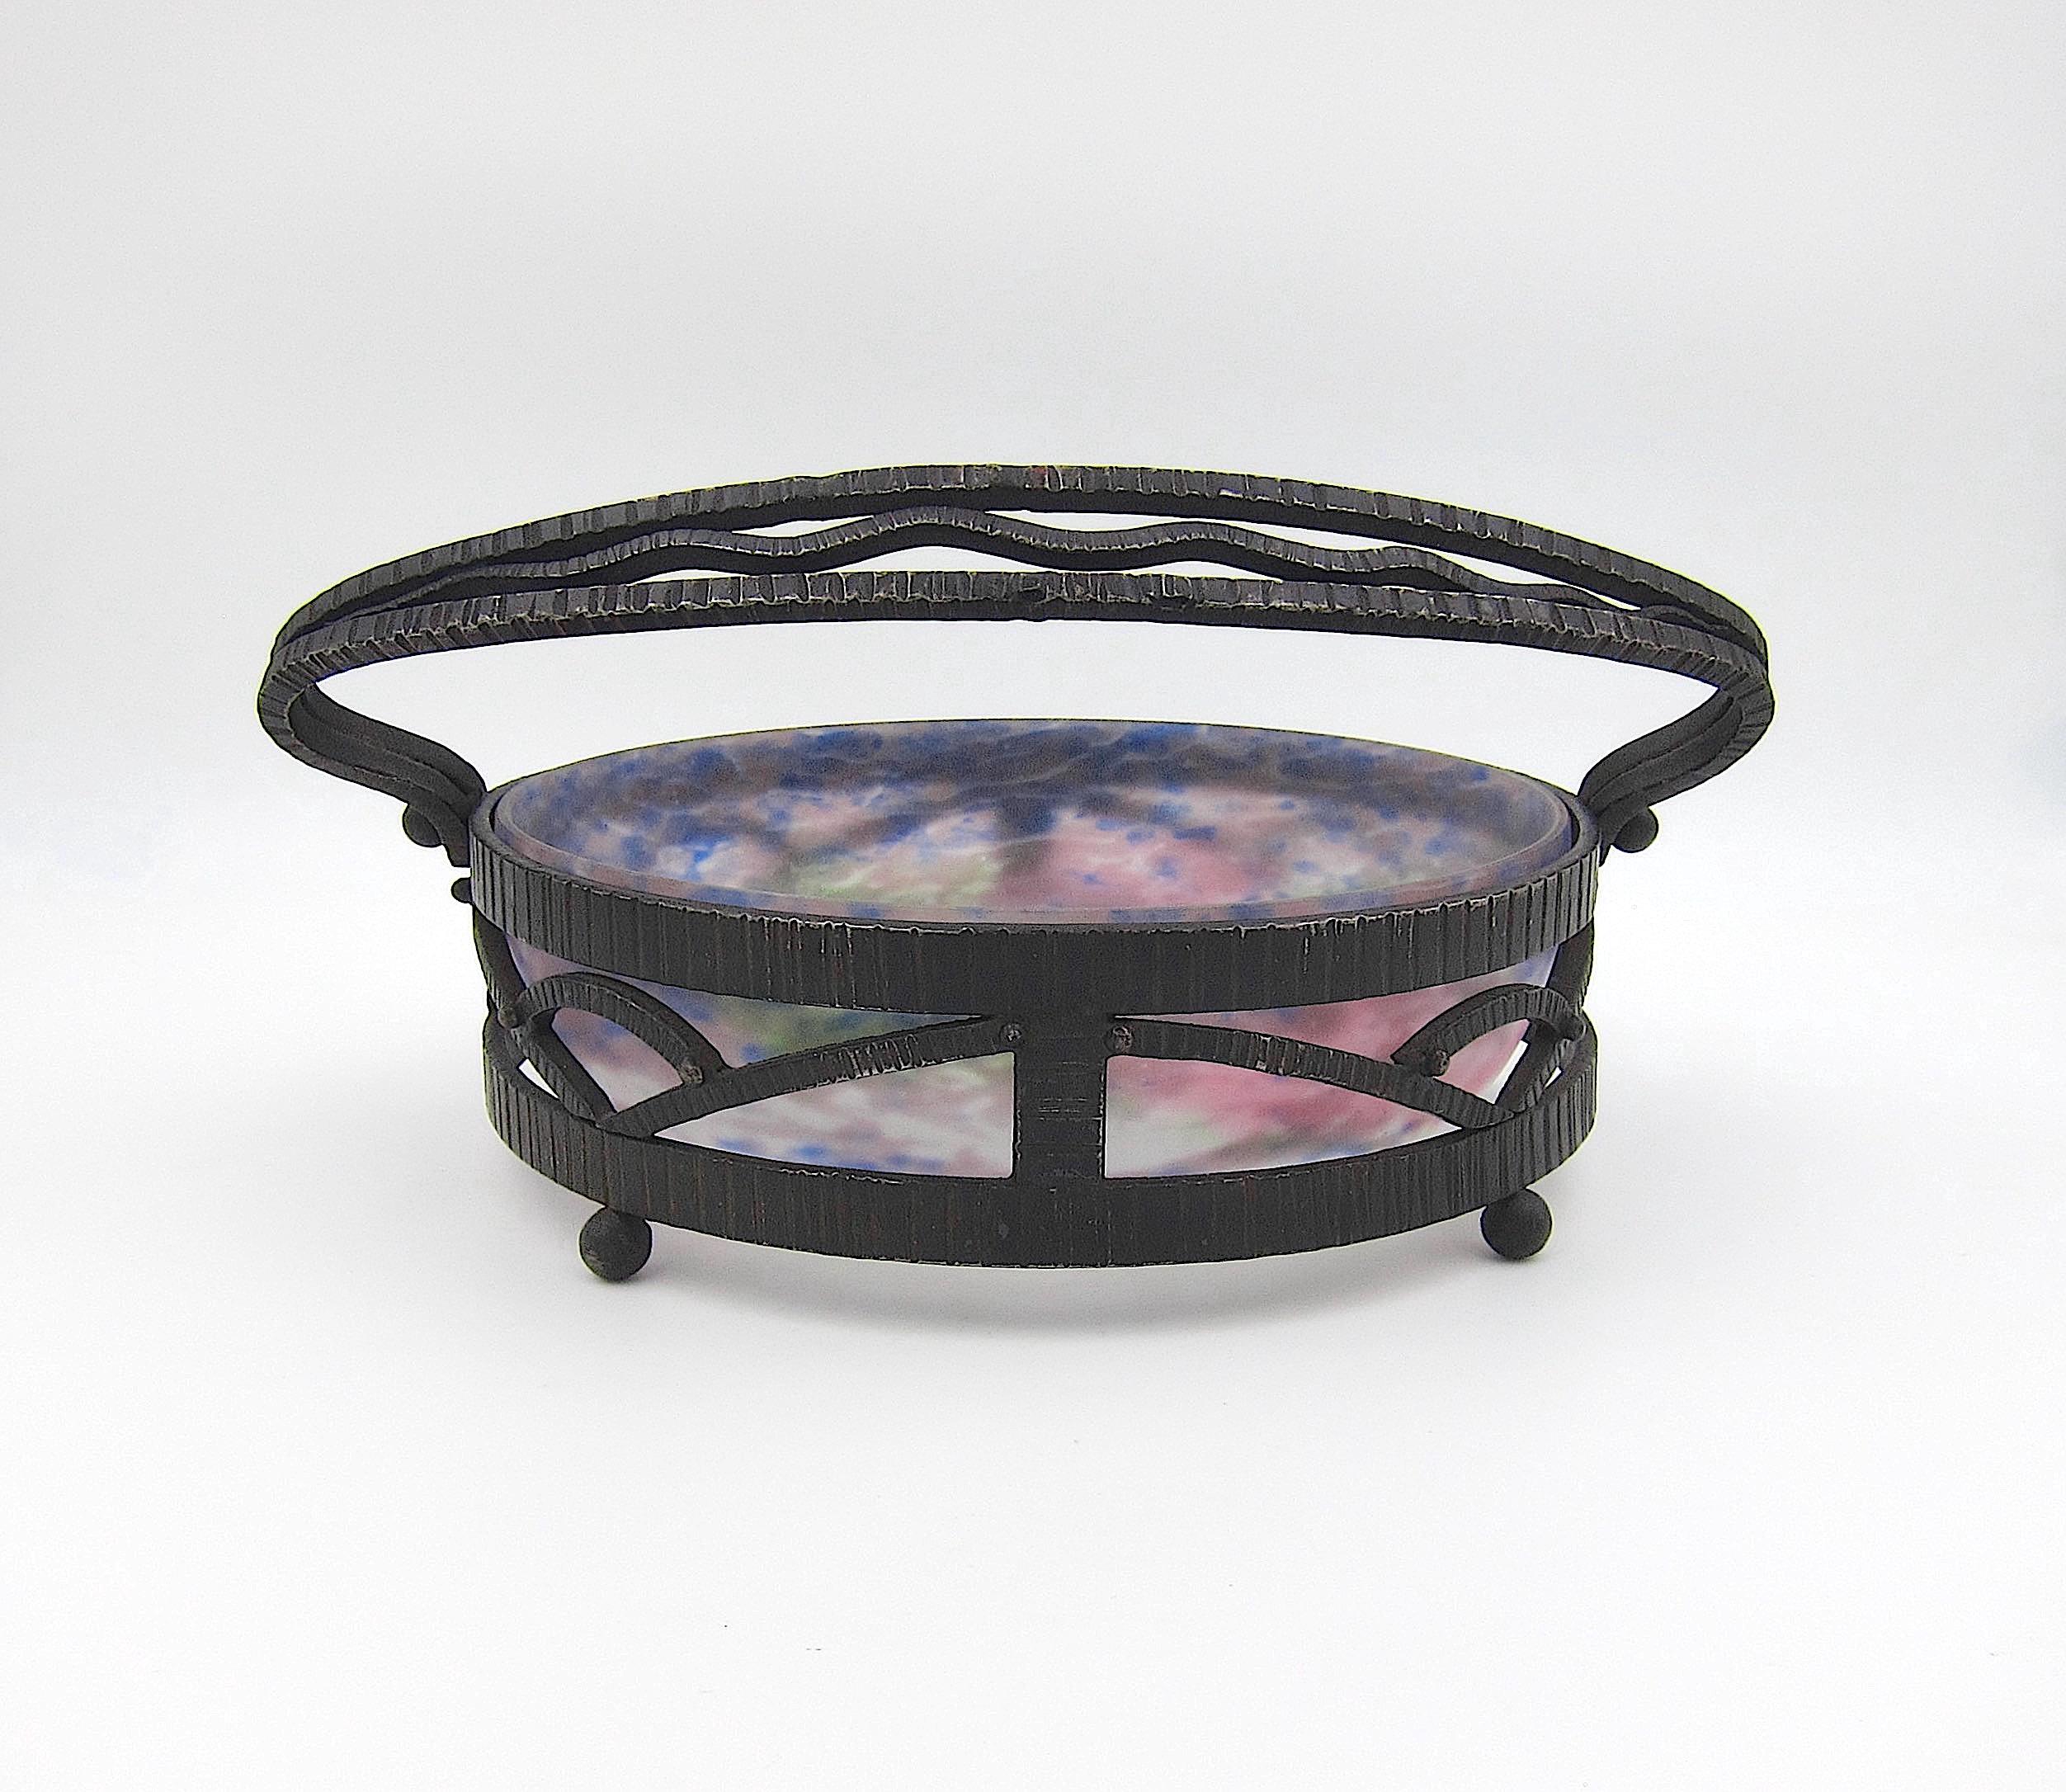 A French Muller Frères à Lunéville circular bowl fitted within a wrought iron carrier, dating circa 1920. The frosted art glass bowl with blue, green, and pink mottled accents bears an acid-etched Muller Fres / Luneville mark on the side. The